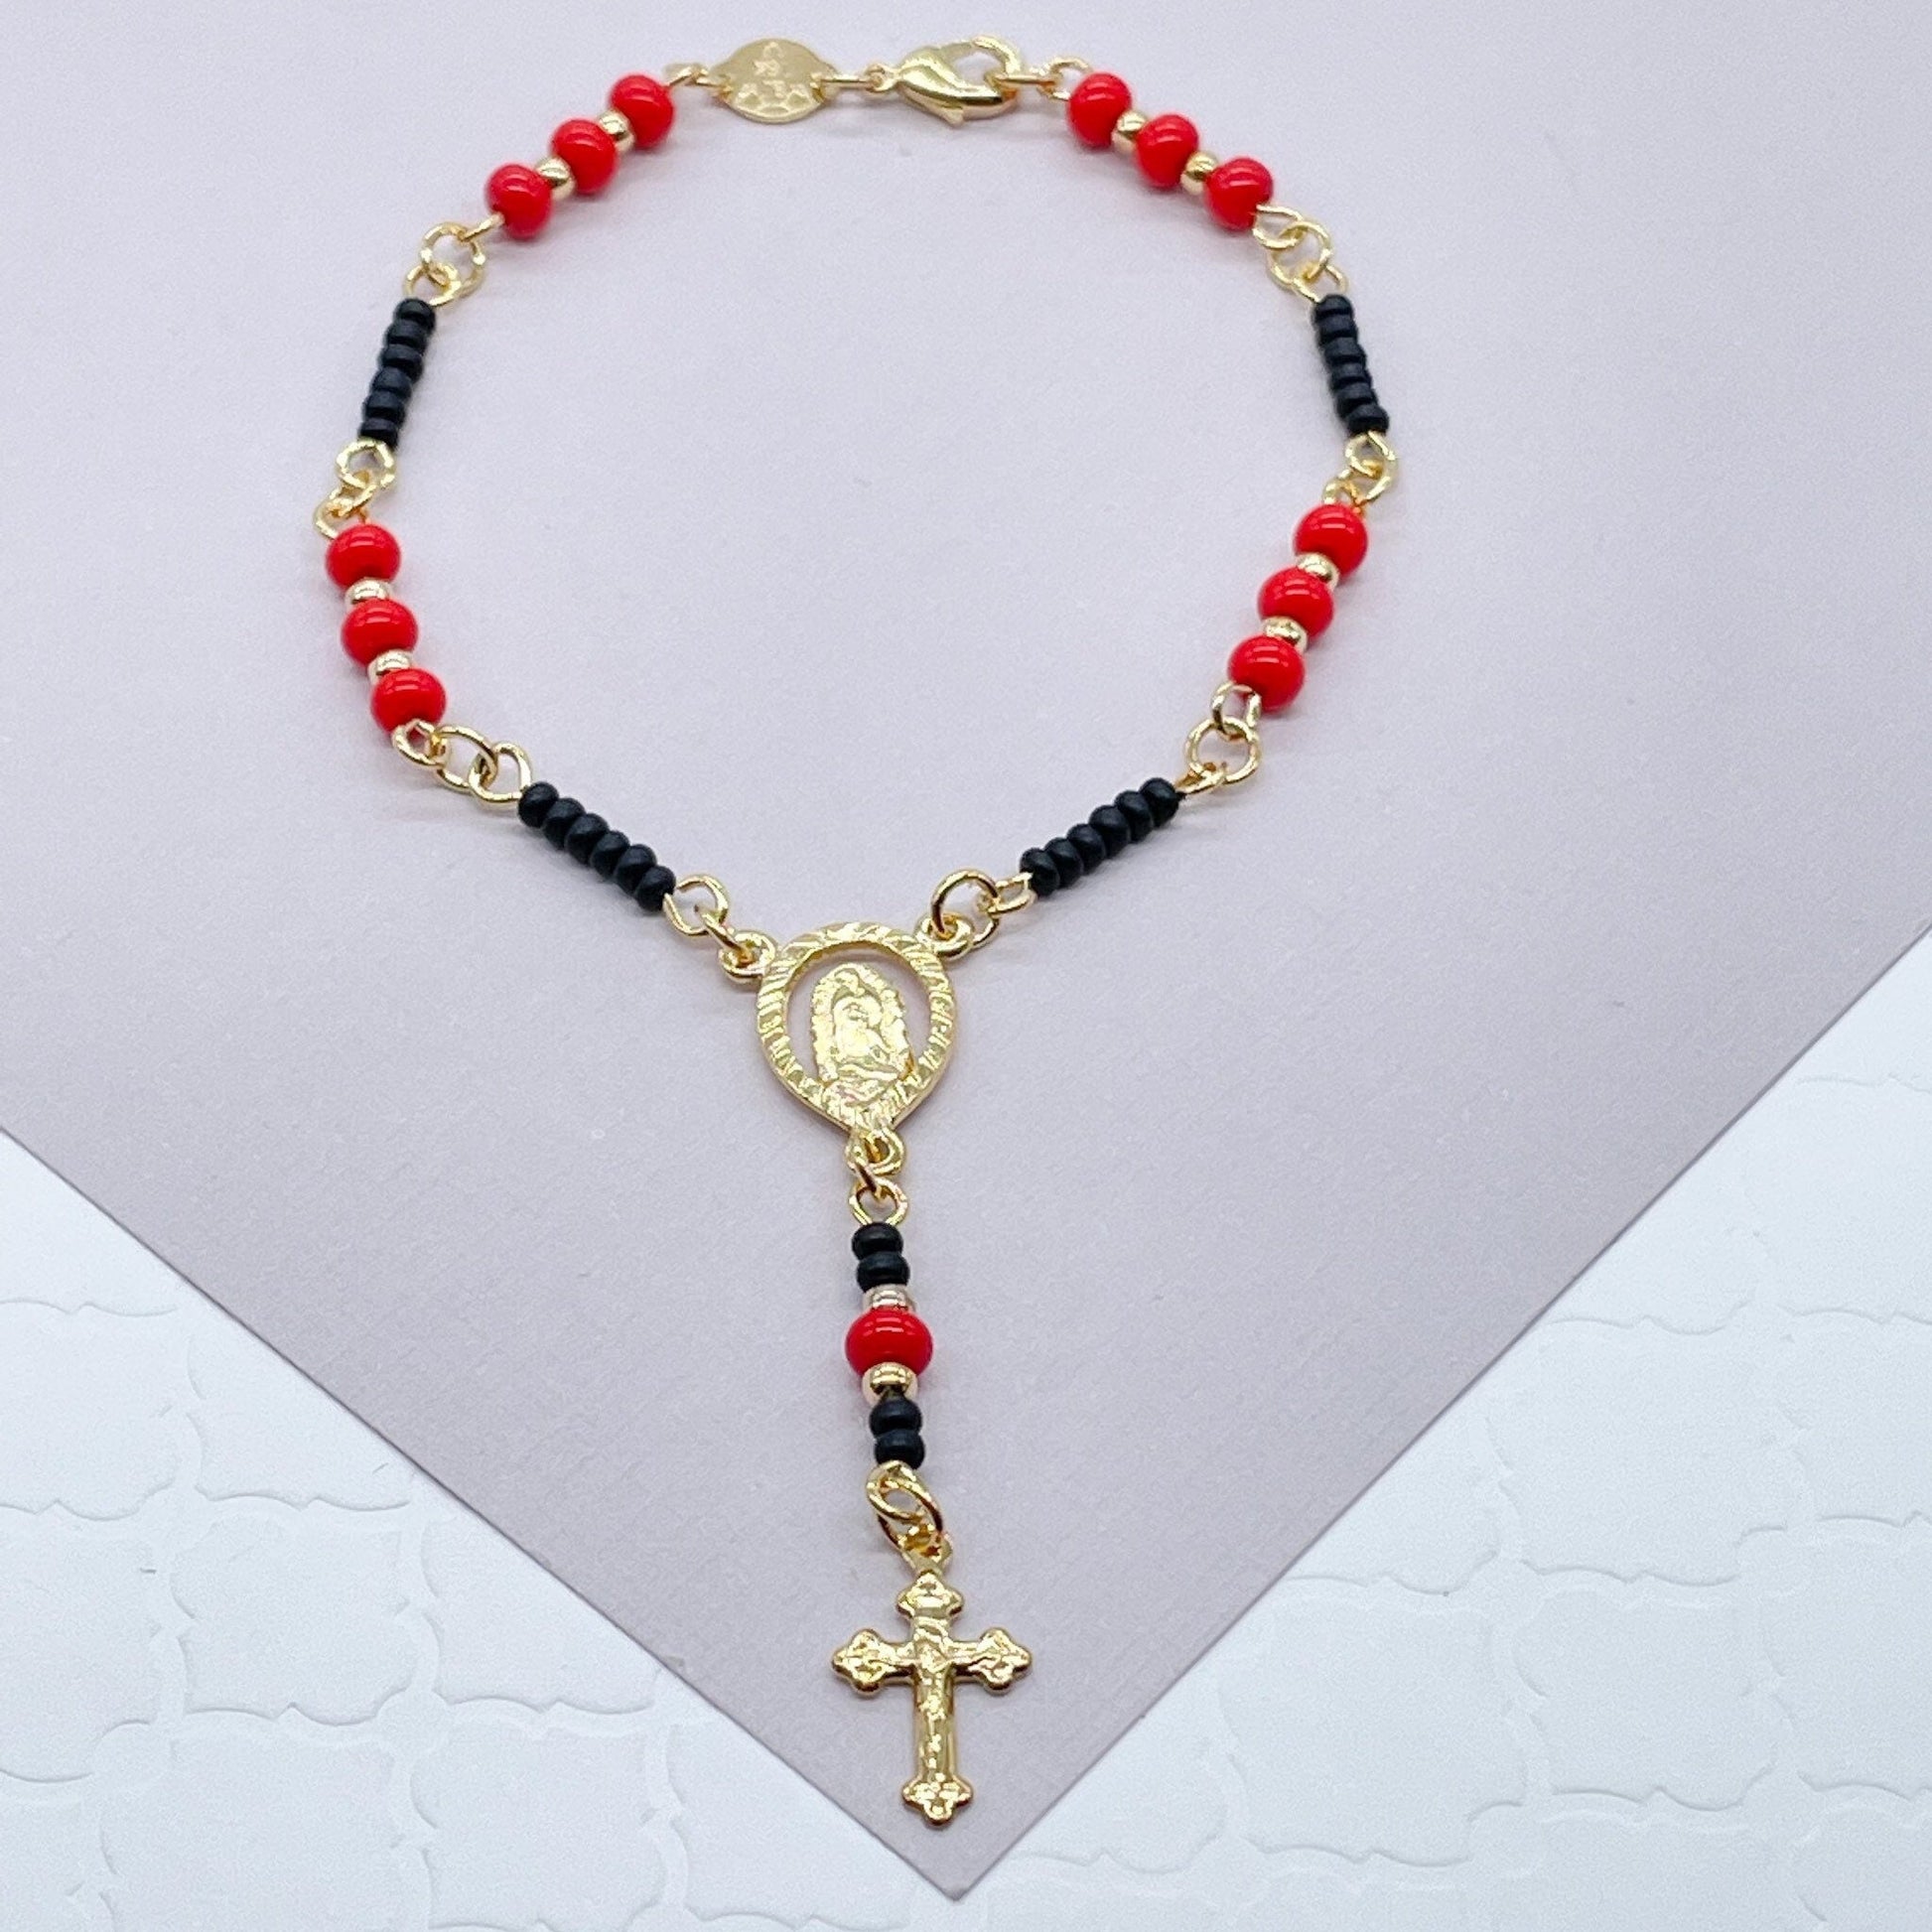 18k Gold Filled Protection Beaded Rosary Bracelet Featuring Our Lady of Guadalupe With Crucifix Cross